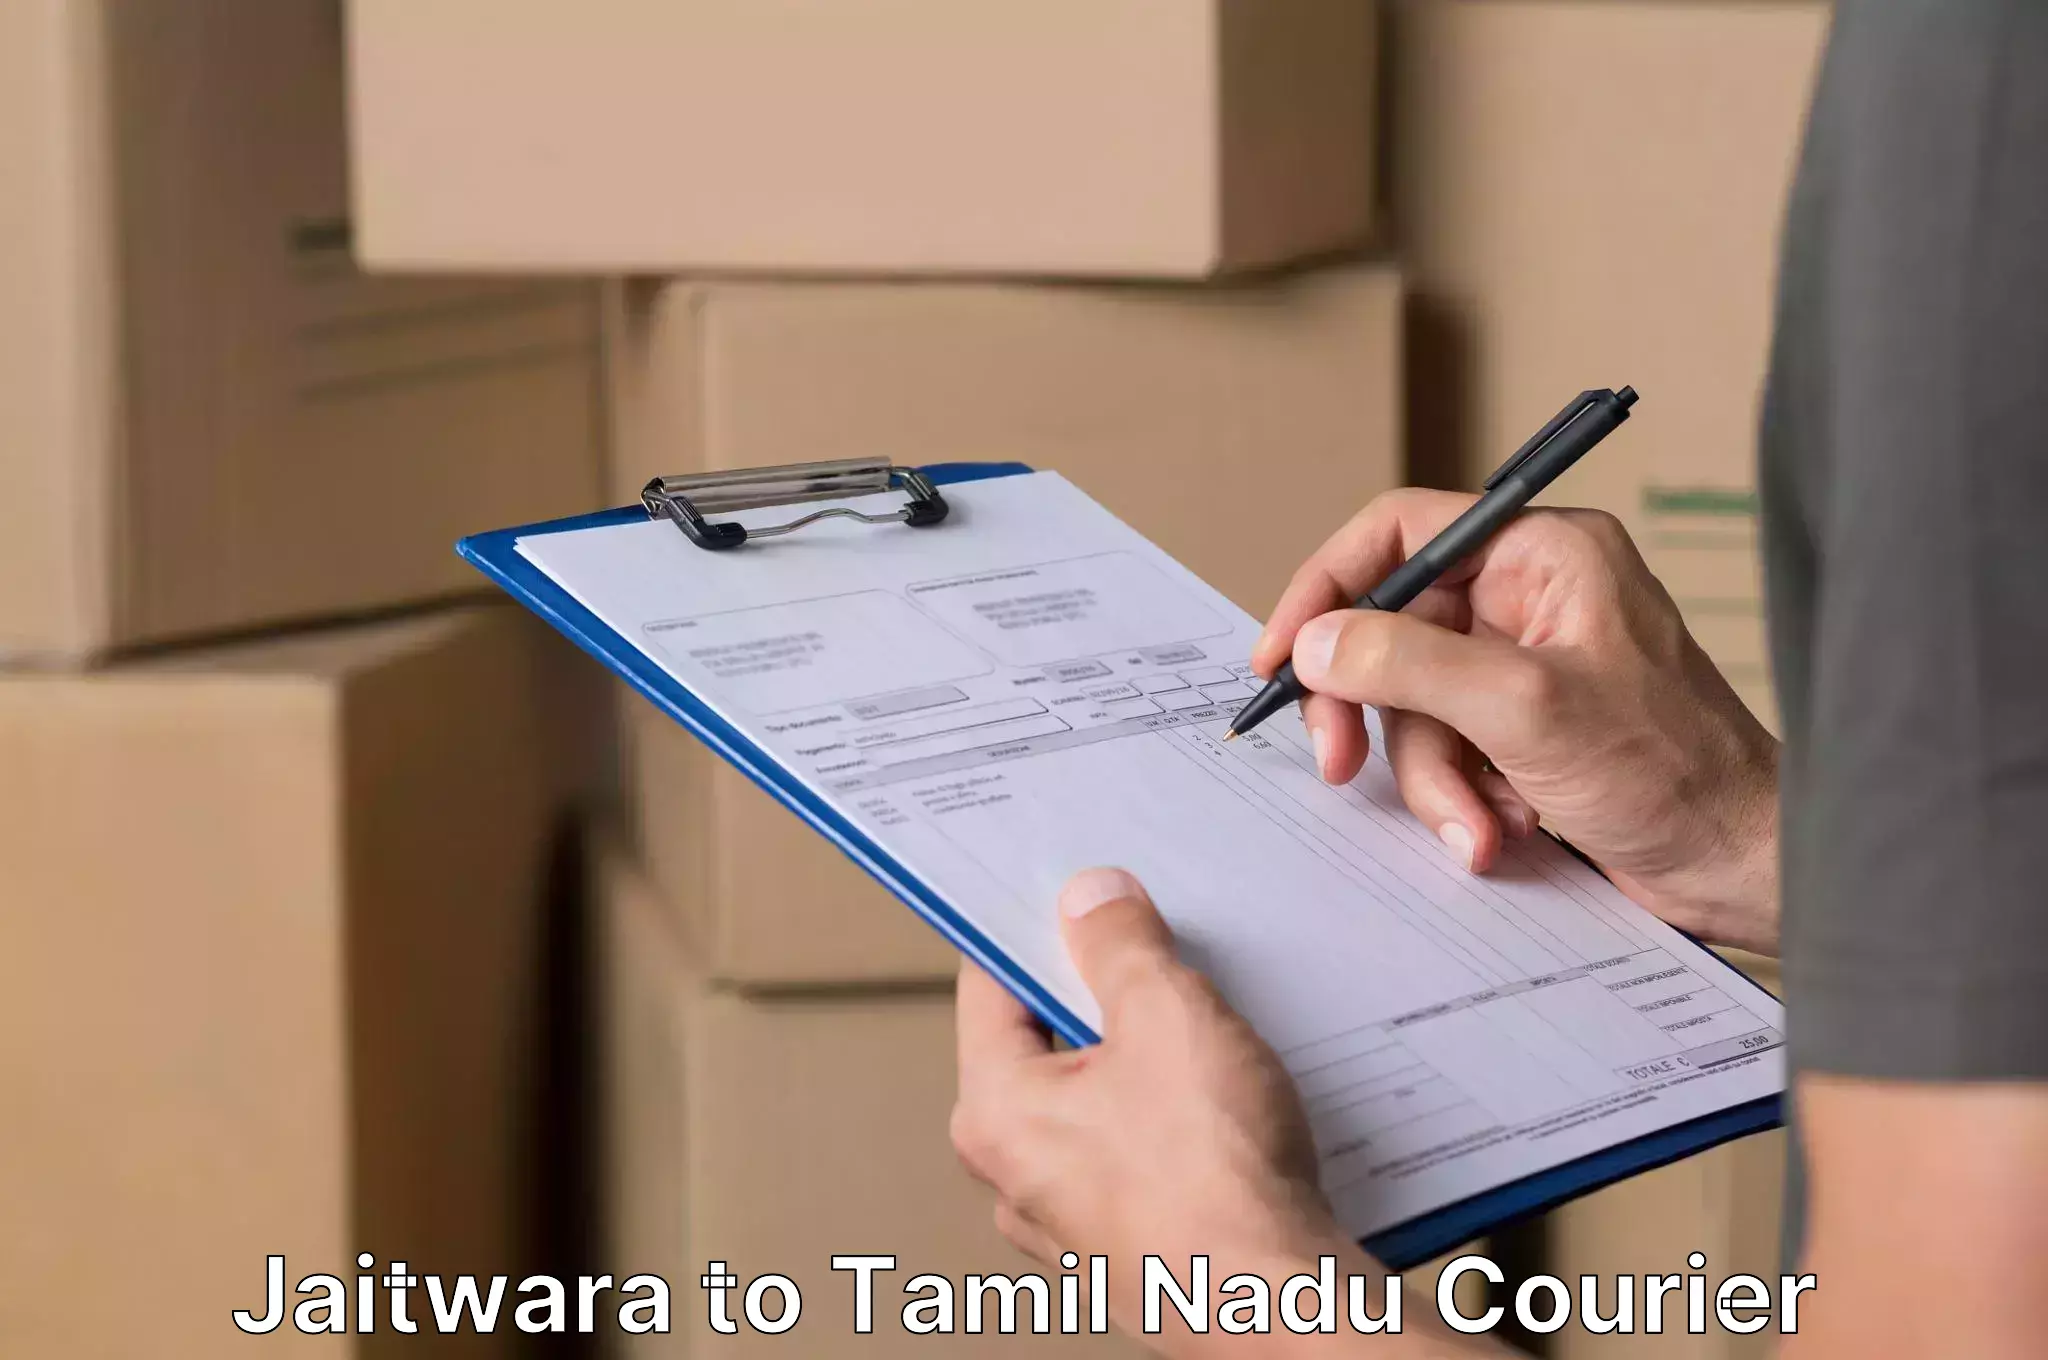 Quality moving and storage in Jaitwara to Mylapore